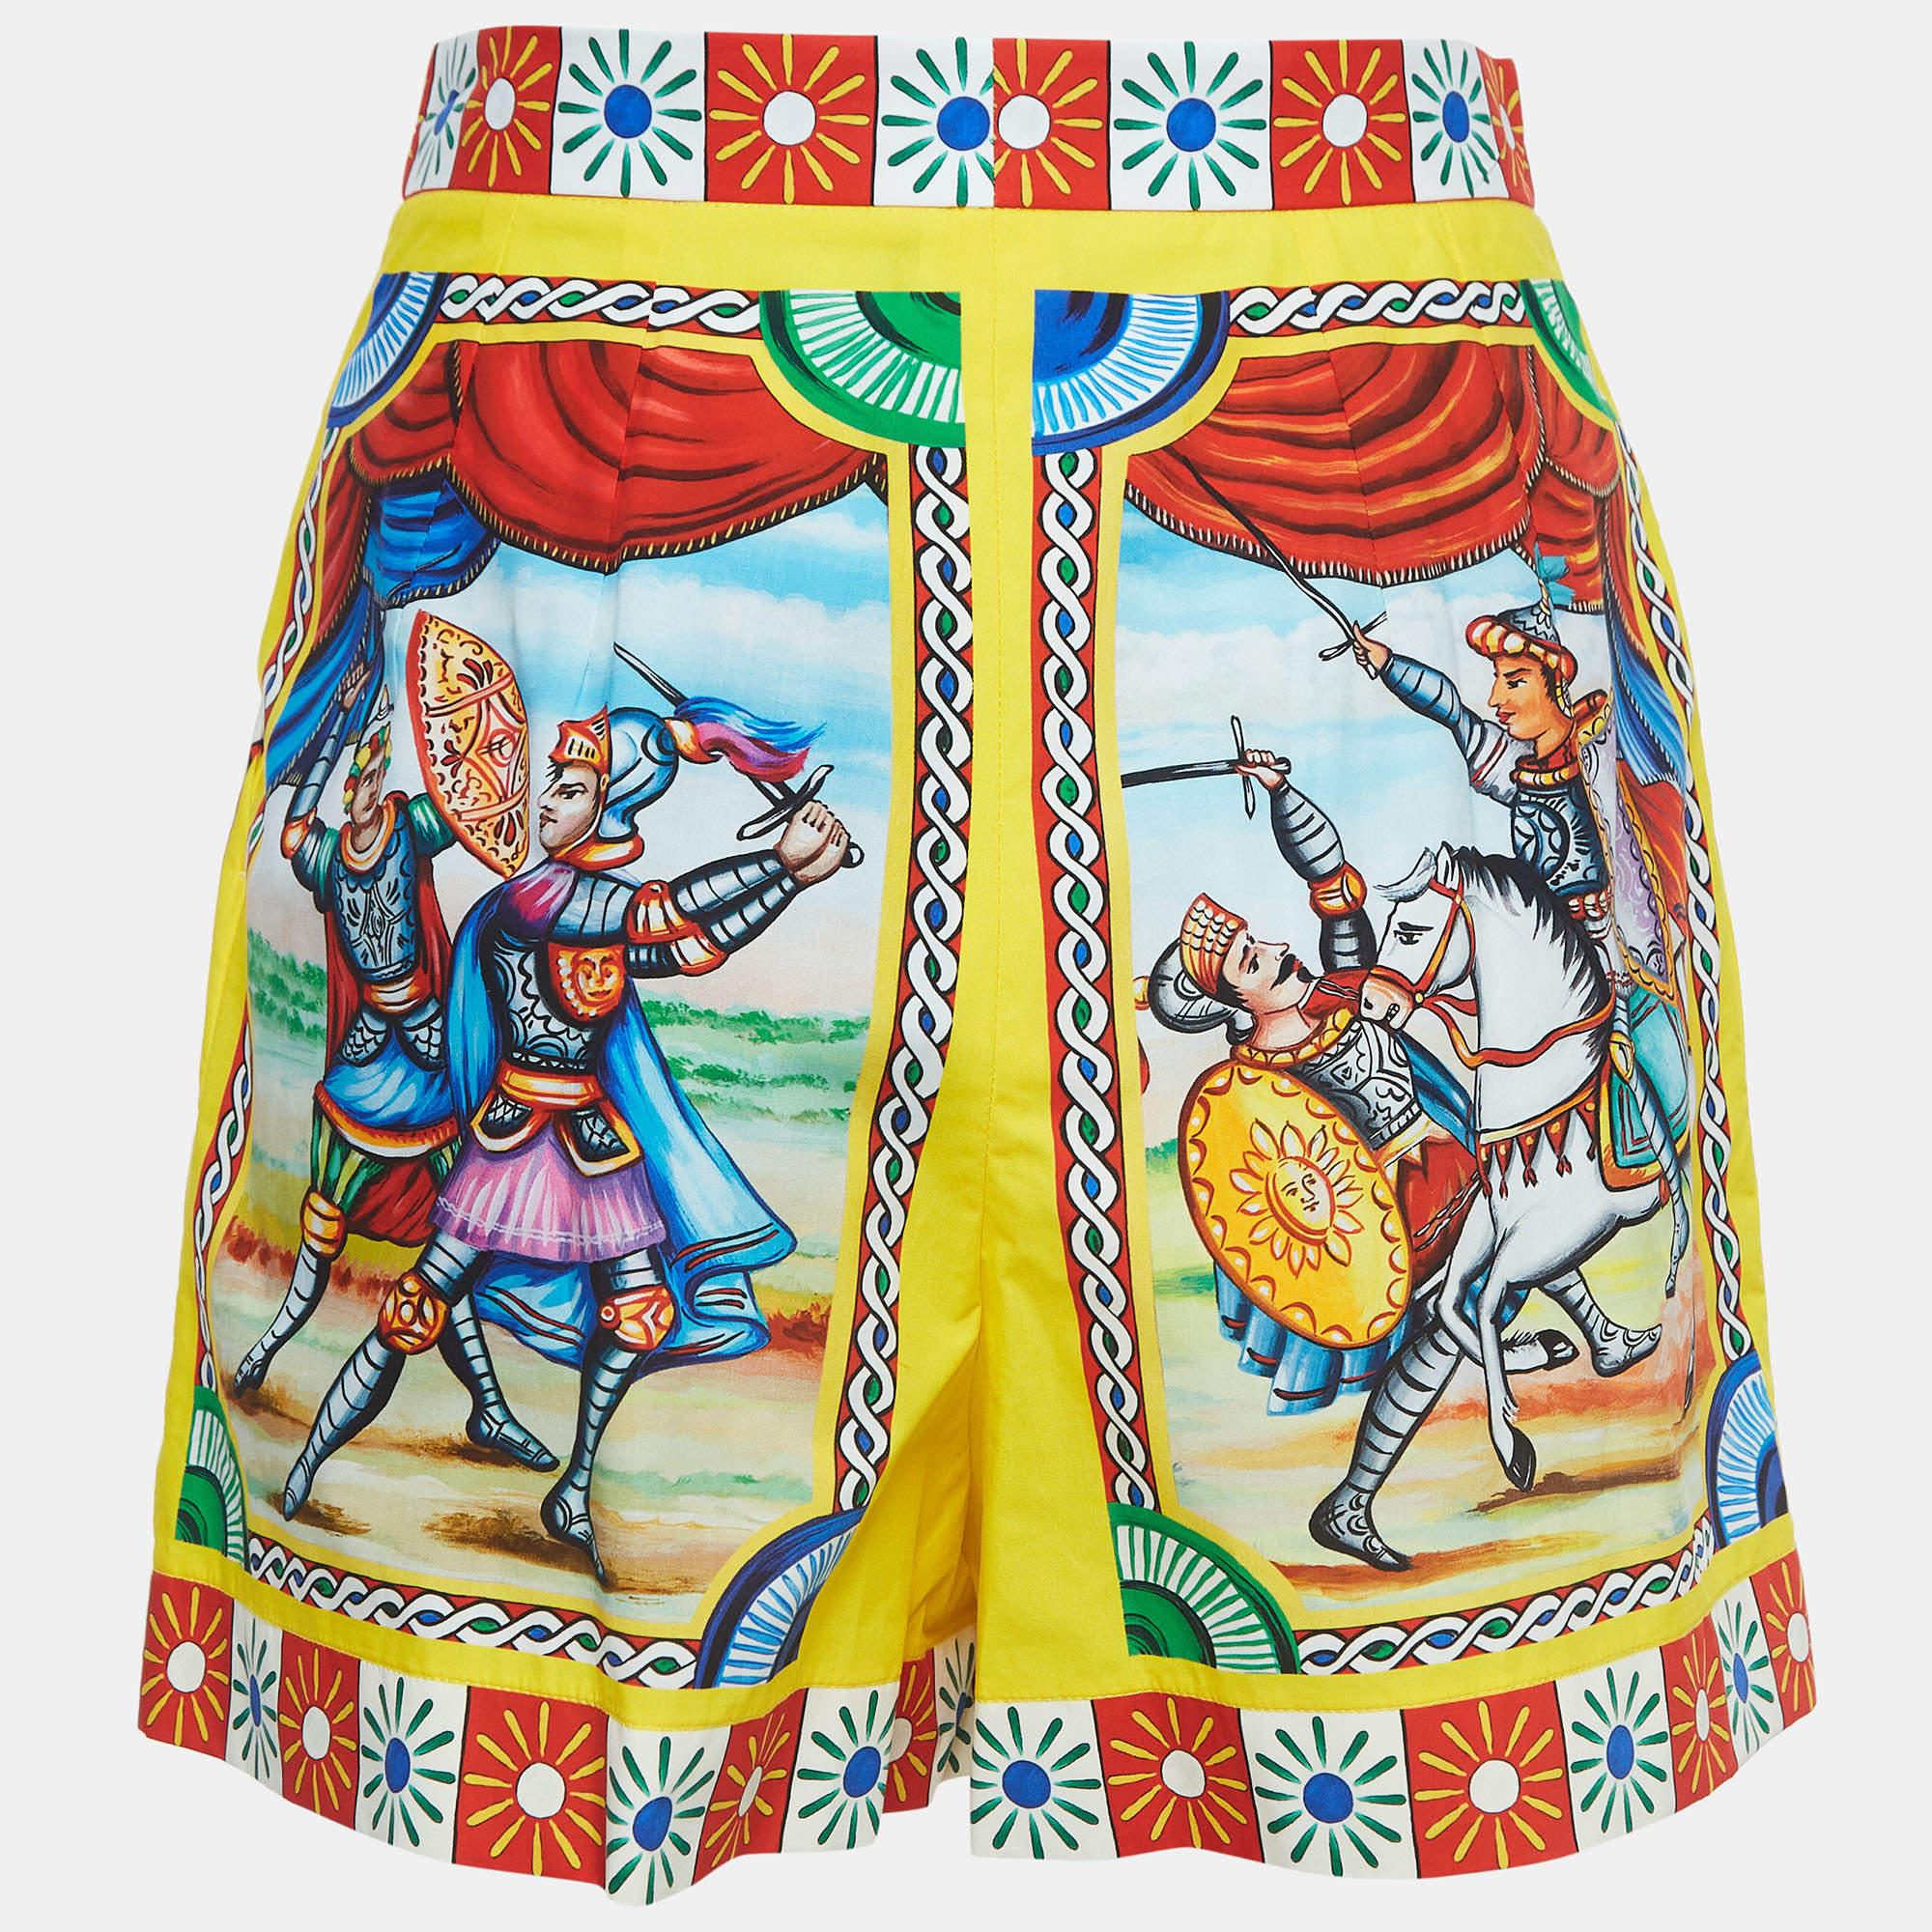 The Dolce & Gabbana shorts are a vibrant embodiment of summer sophistication. Crafted from premium cotton, these shorts boast a striking multicolor print that exudes energy and style. With a flattering high waist design, they offer both comfort and